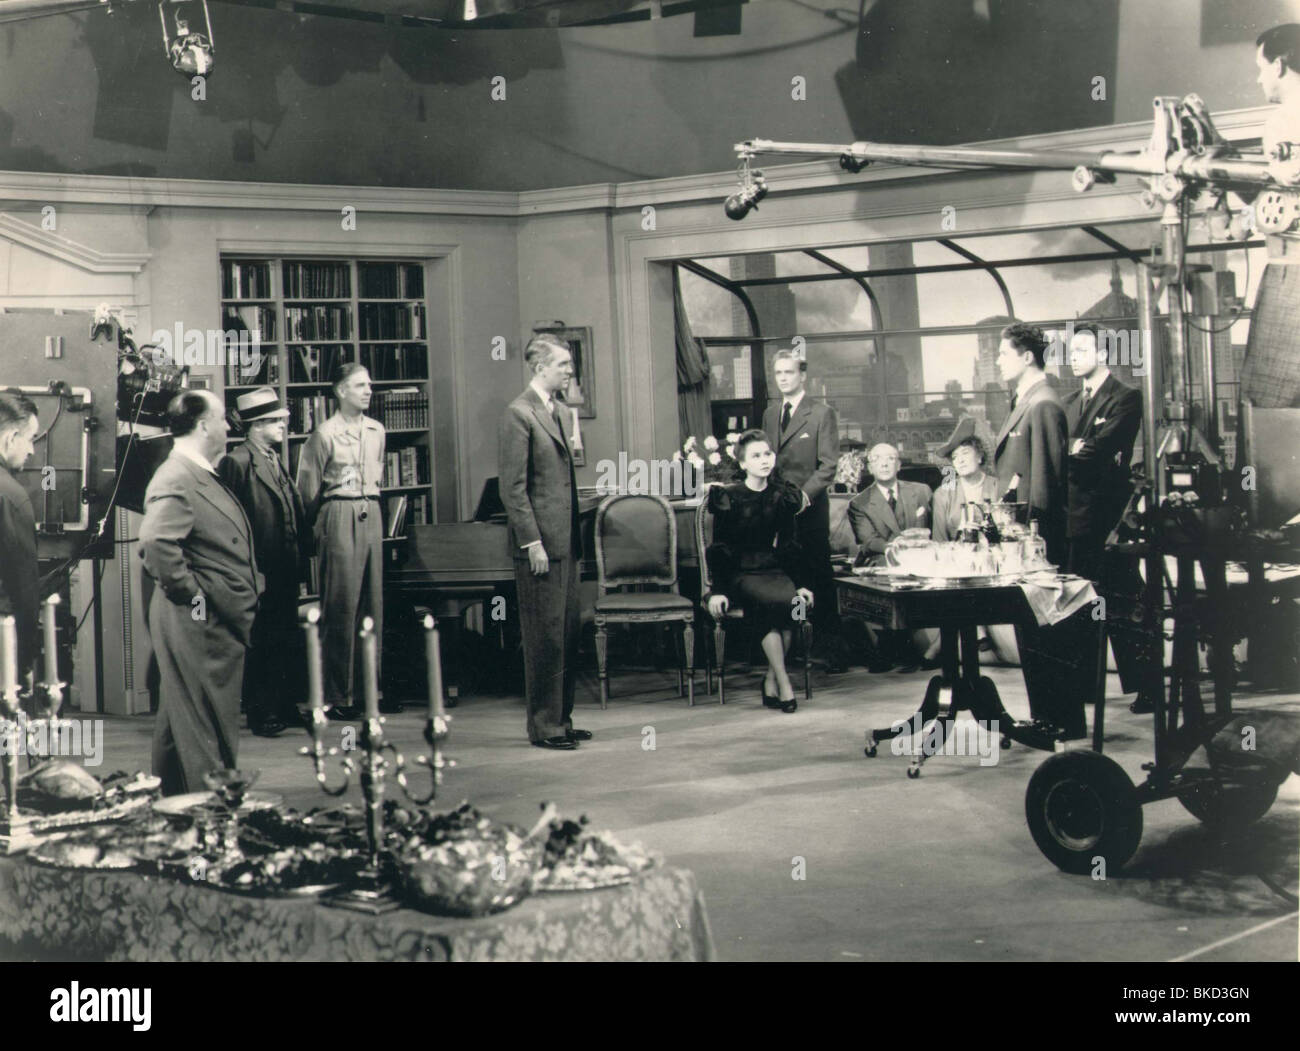 ALFRED HITCHCOCK (DIR) O/S 'ROPE' (1948) WITH JAMES STEWART ALH 008P Stock  Photo - Alamy